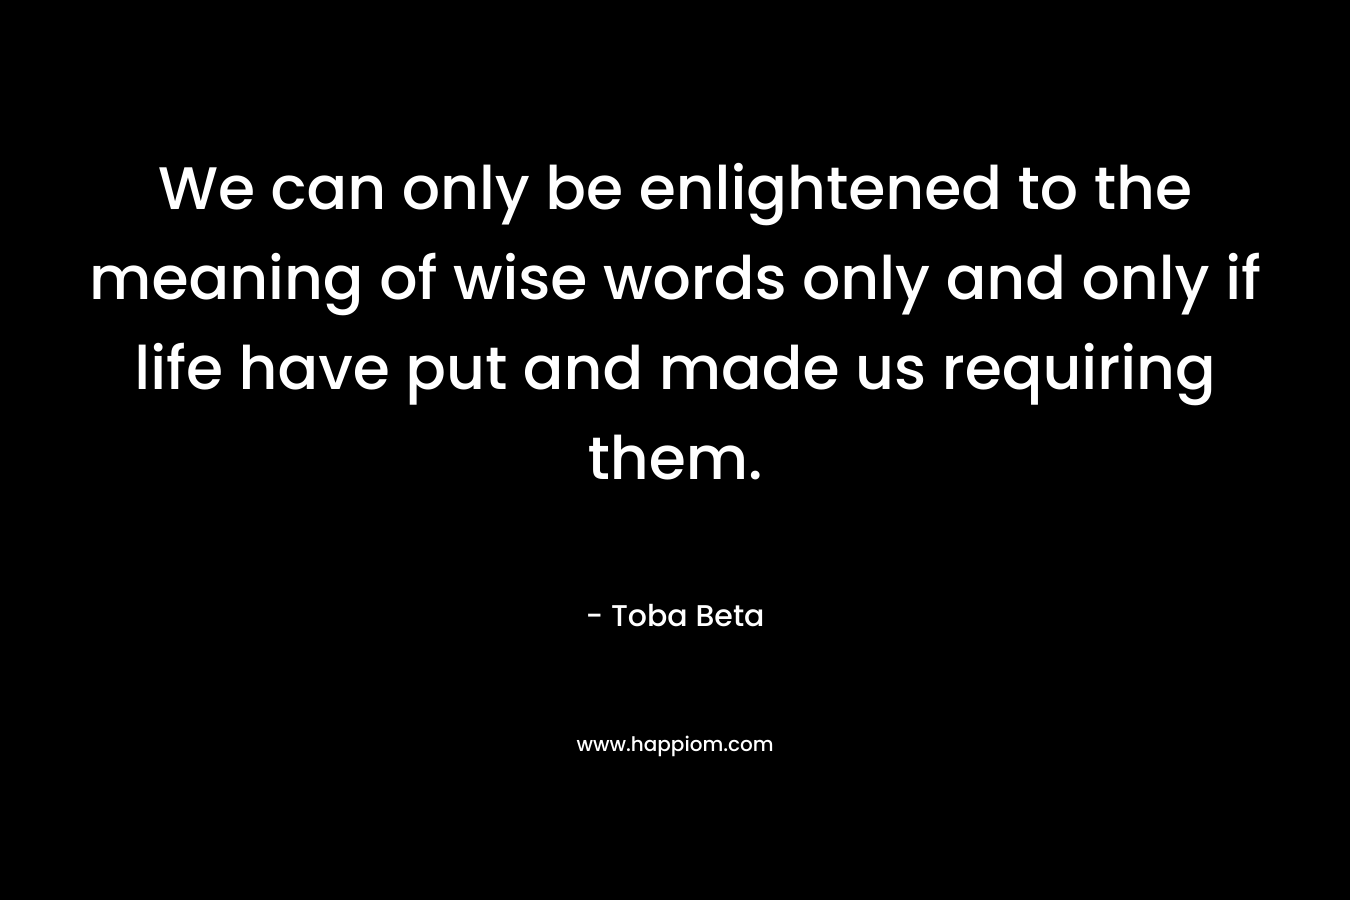 We can only be enlightened to the meaning of wise words only and only if life have put and made us requiring them.